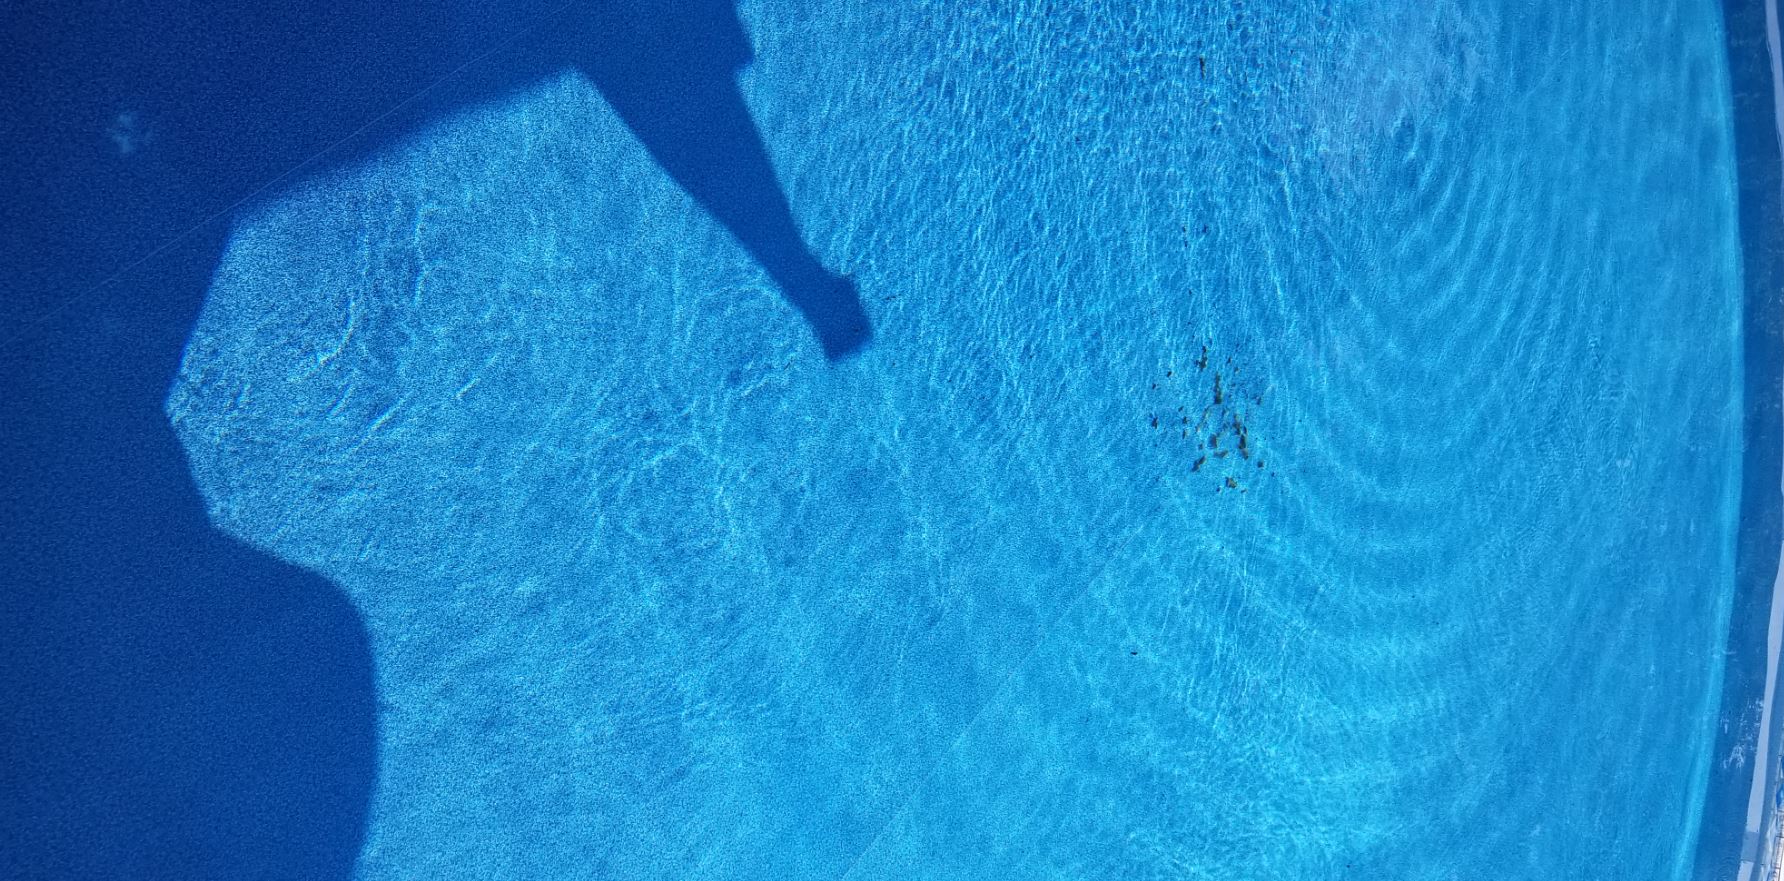 clear pool water 7.5.2020 with gunk in center.JPG